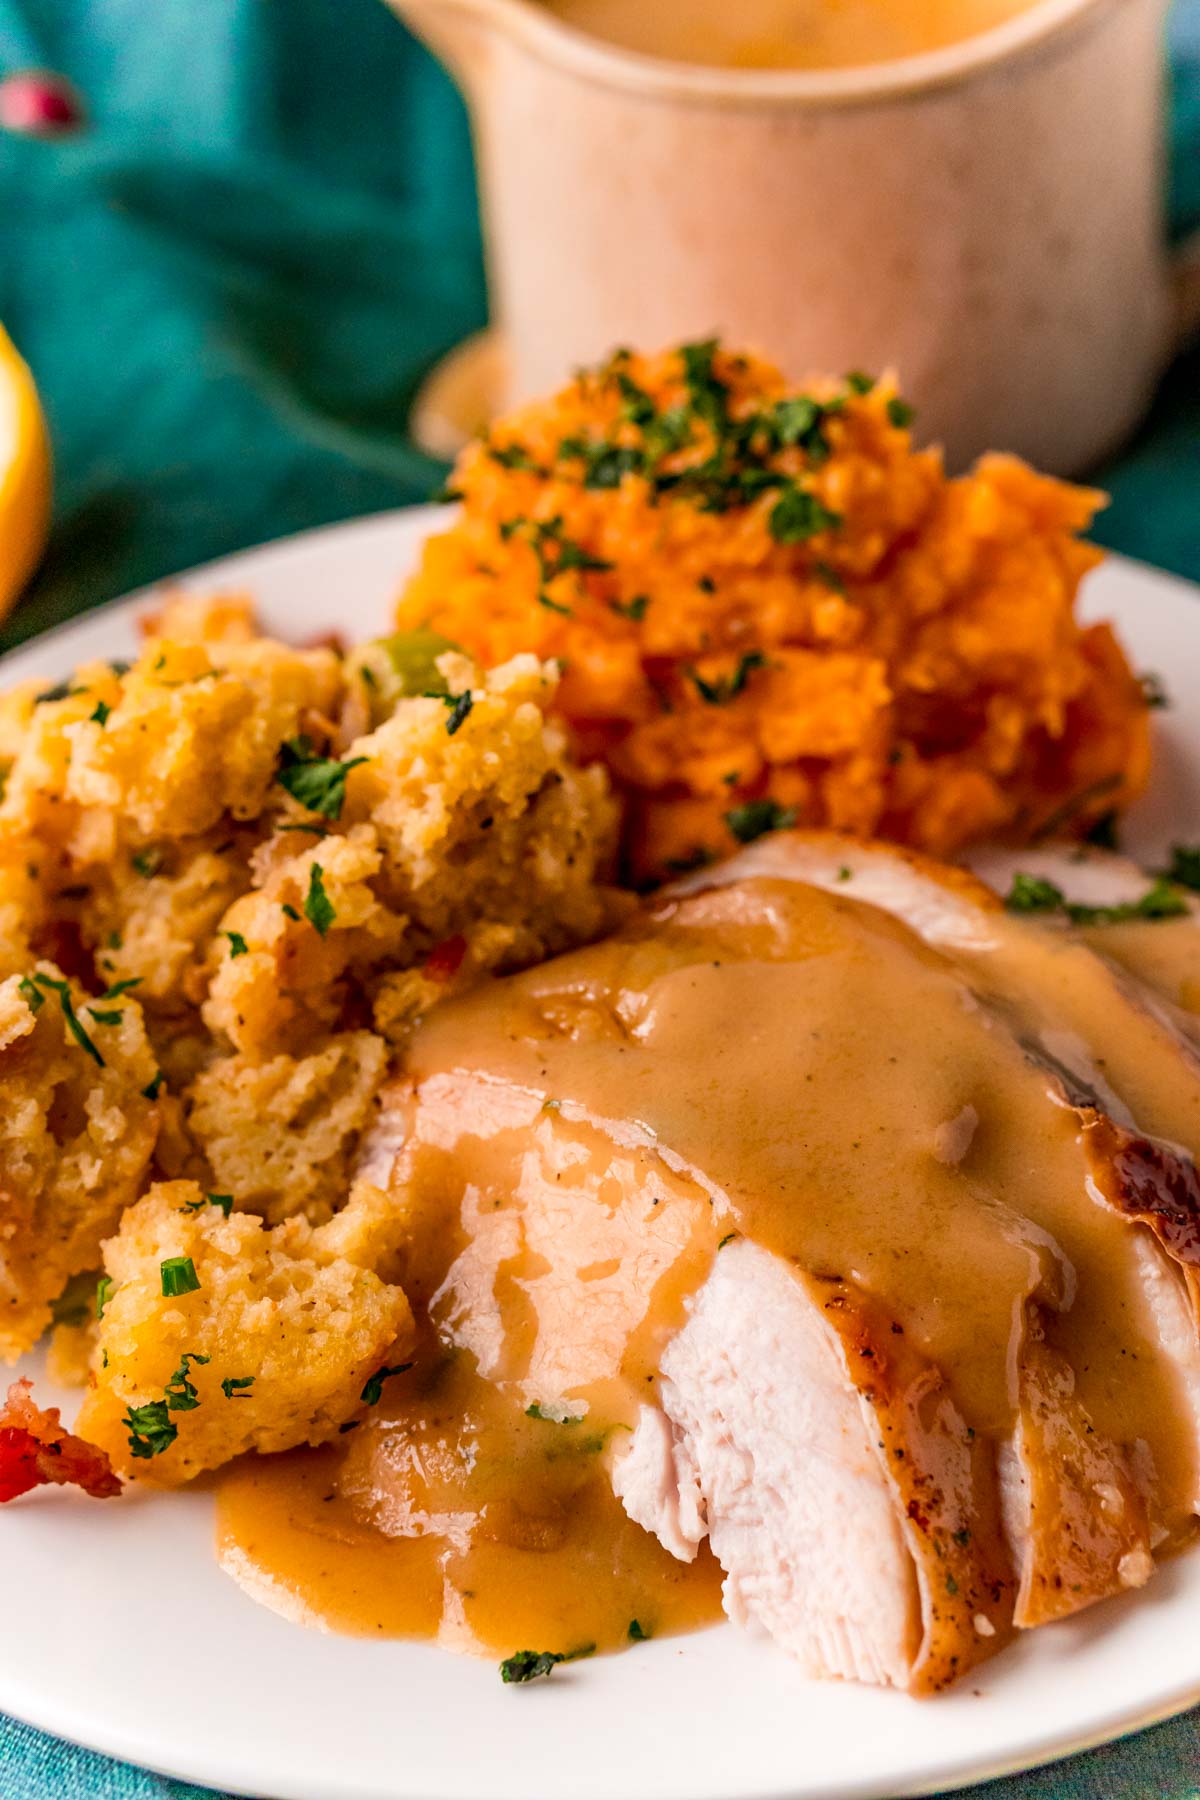 Sliced turkey breast with gravy on top and stuffing and sweet potatoes on the side.